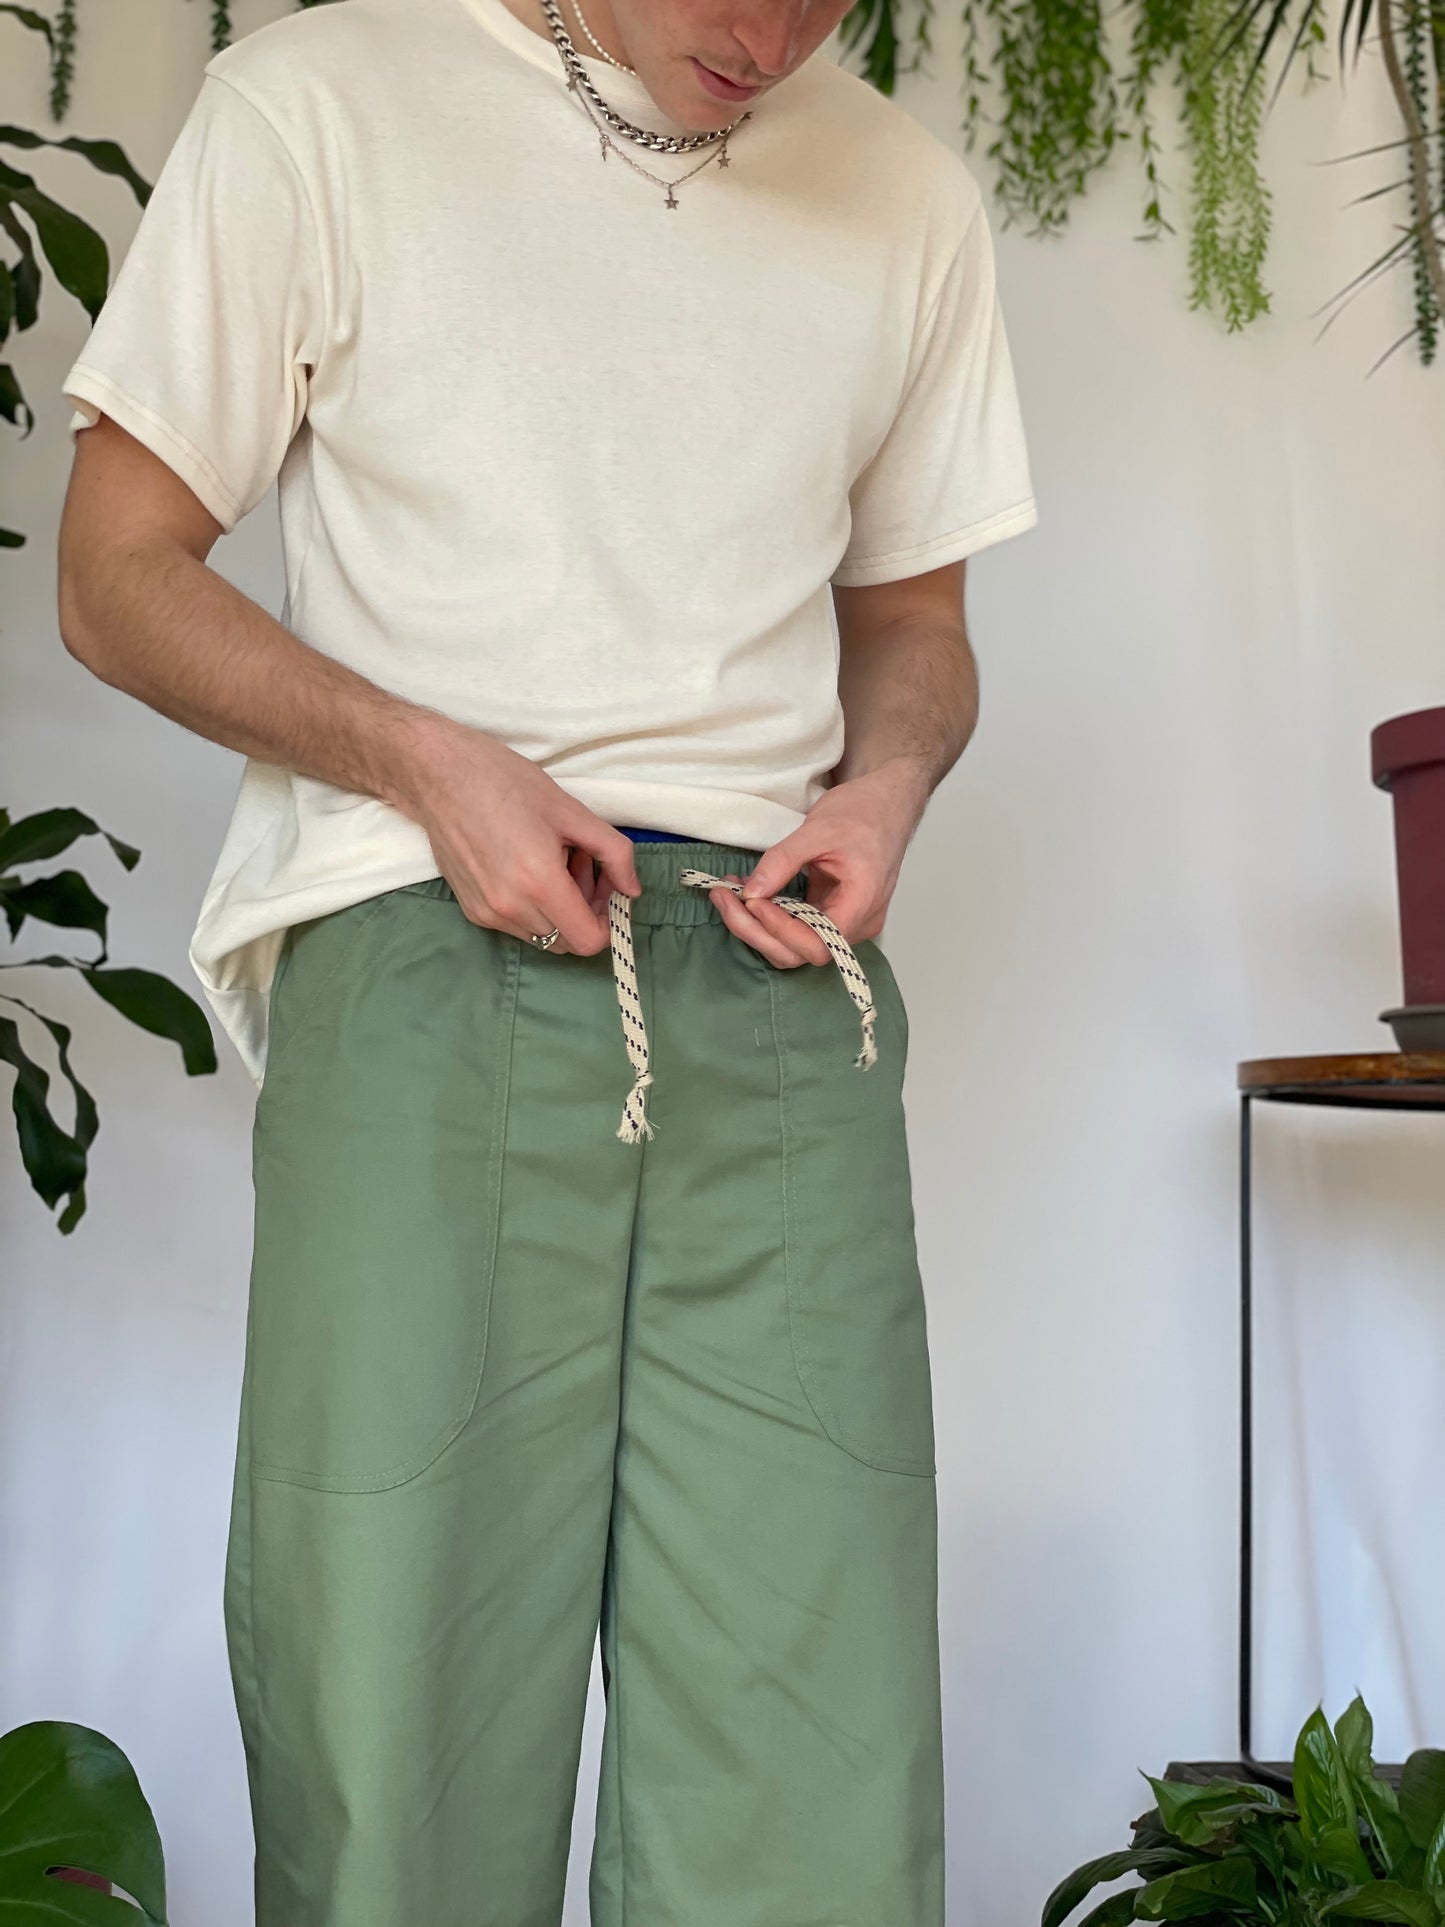 Model wears green pants with a cream t-shirt and silver jewellery. Model stands against a white backdrop with plants and hanging foliage. 